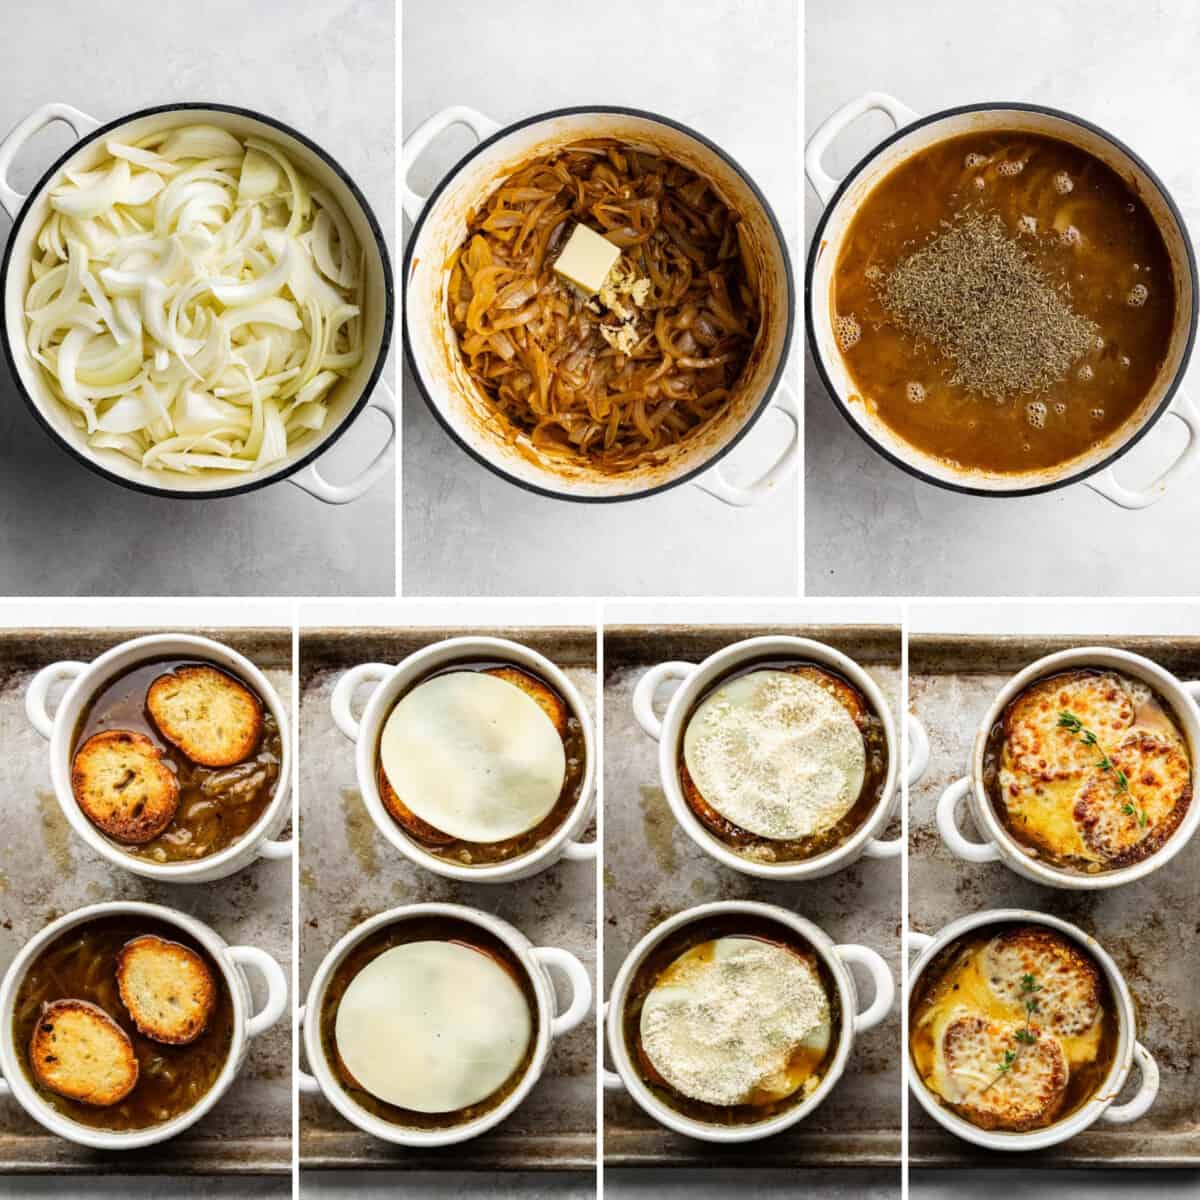 A collage of seven images showing the process of how to make French onion soup from start to finish.